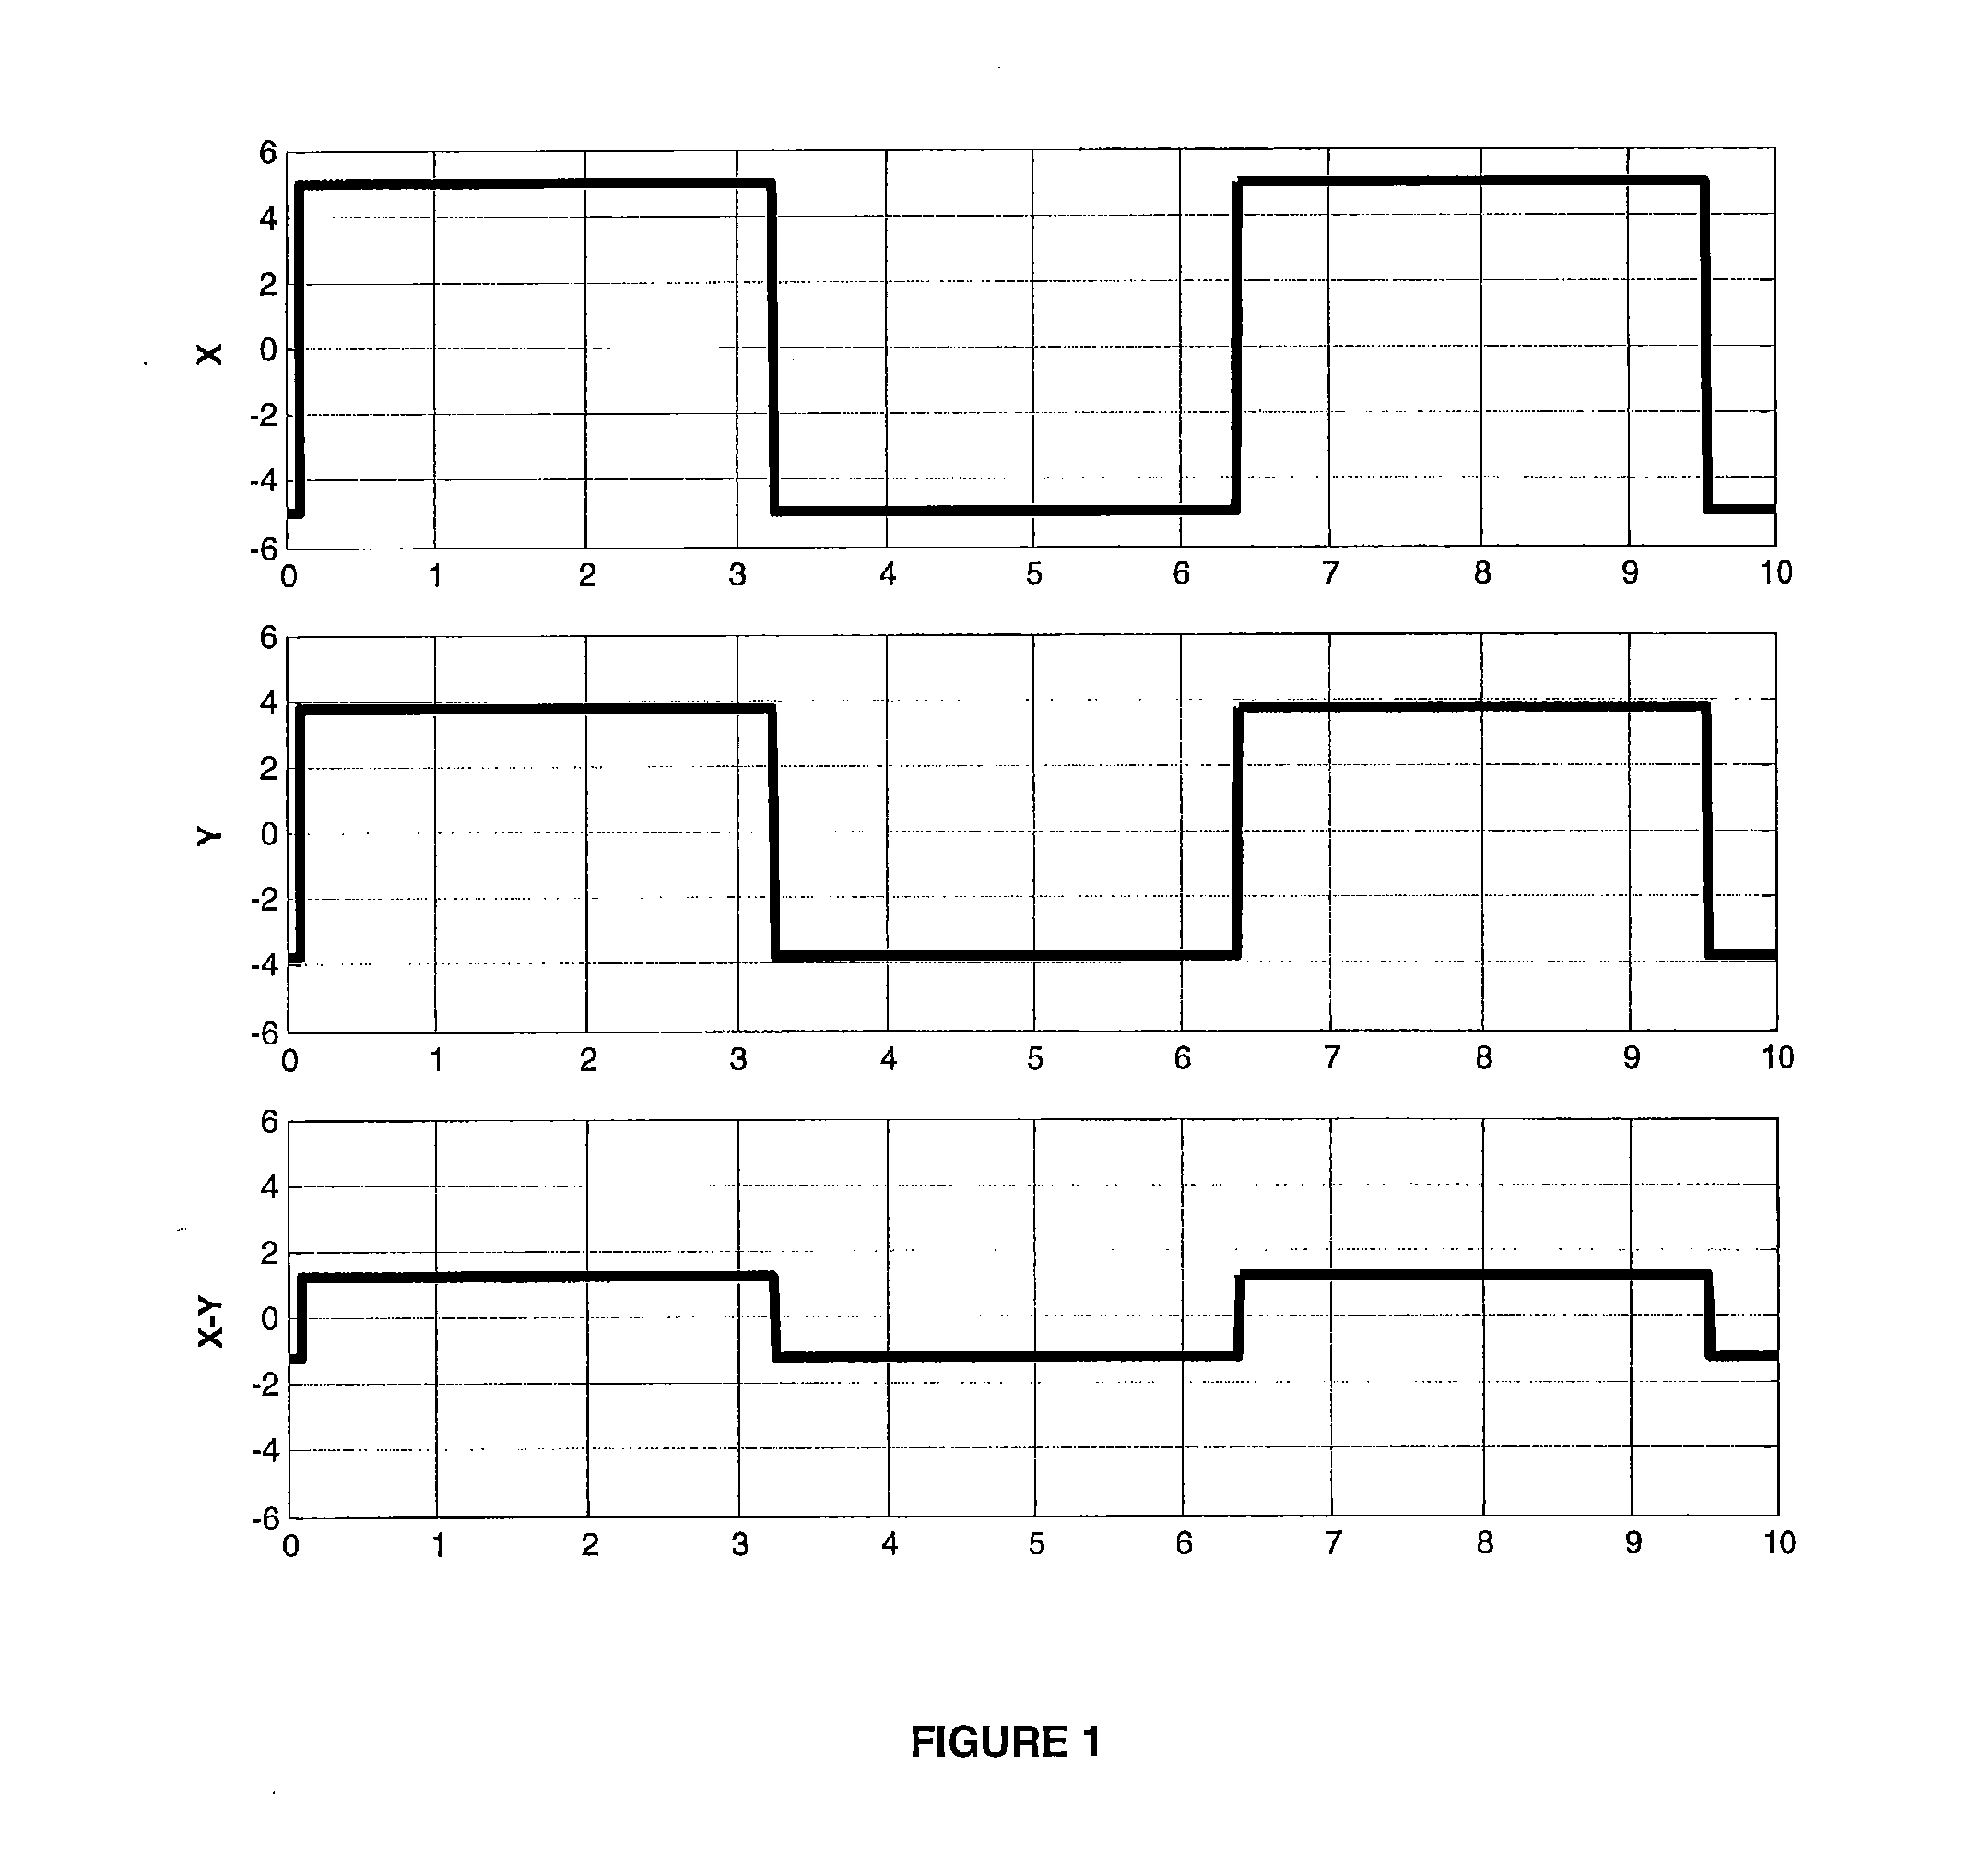 Driving mechanism for liquid crystal based optical device